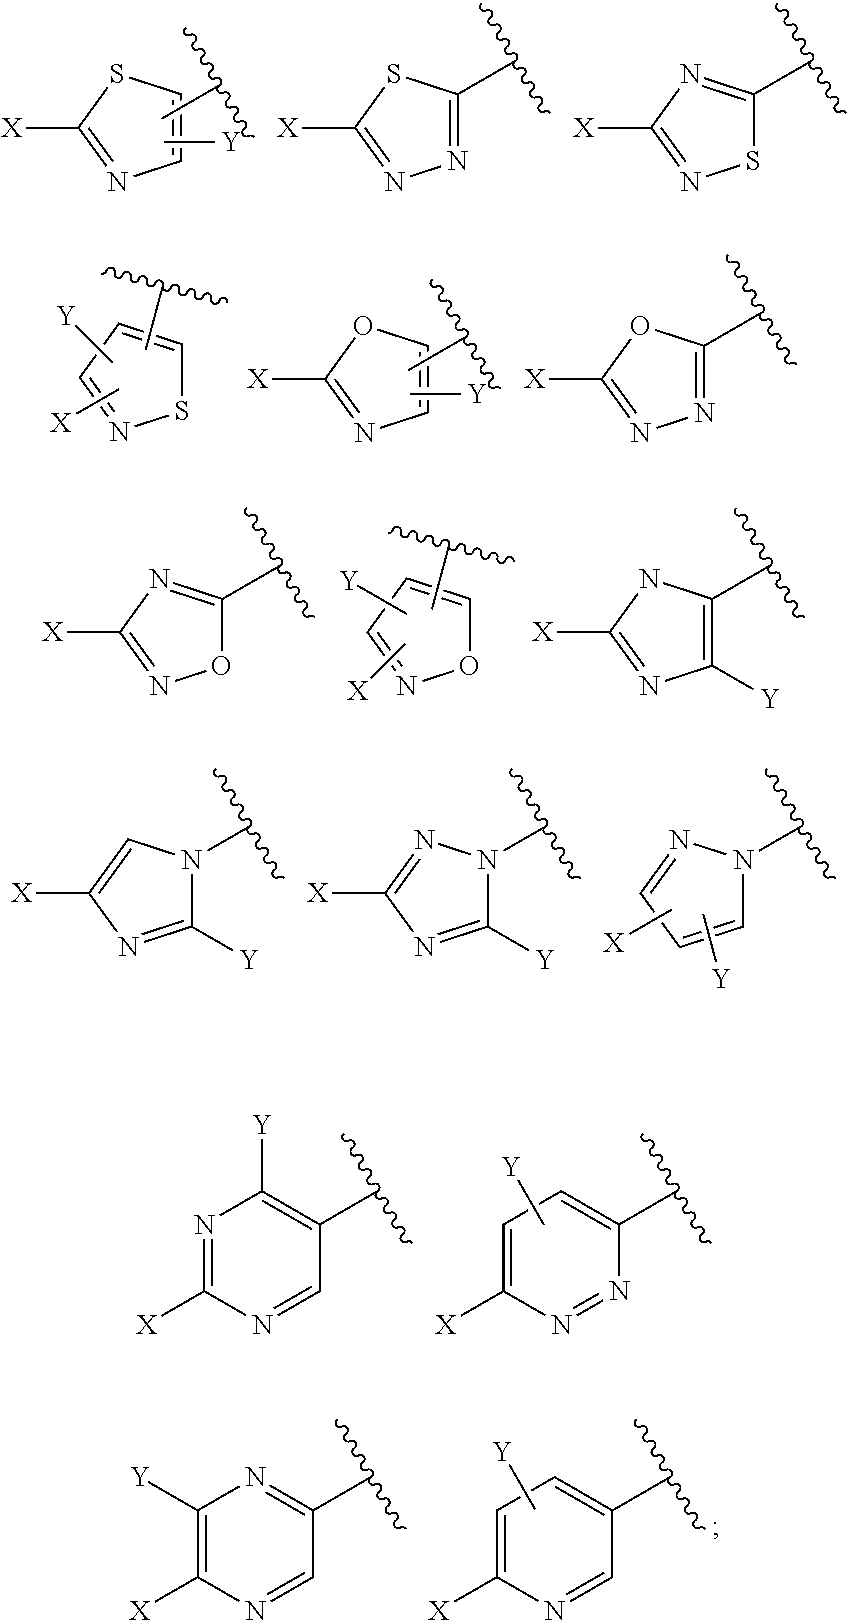 Methods of producing sulfilimine compounds